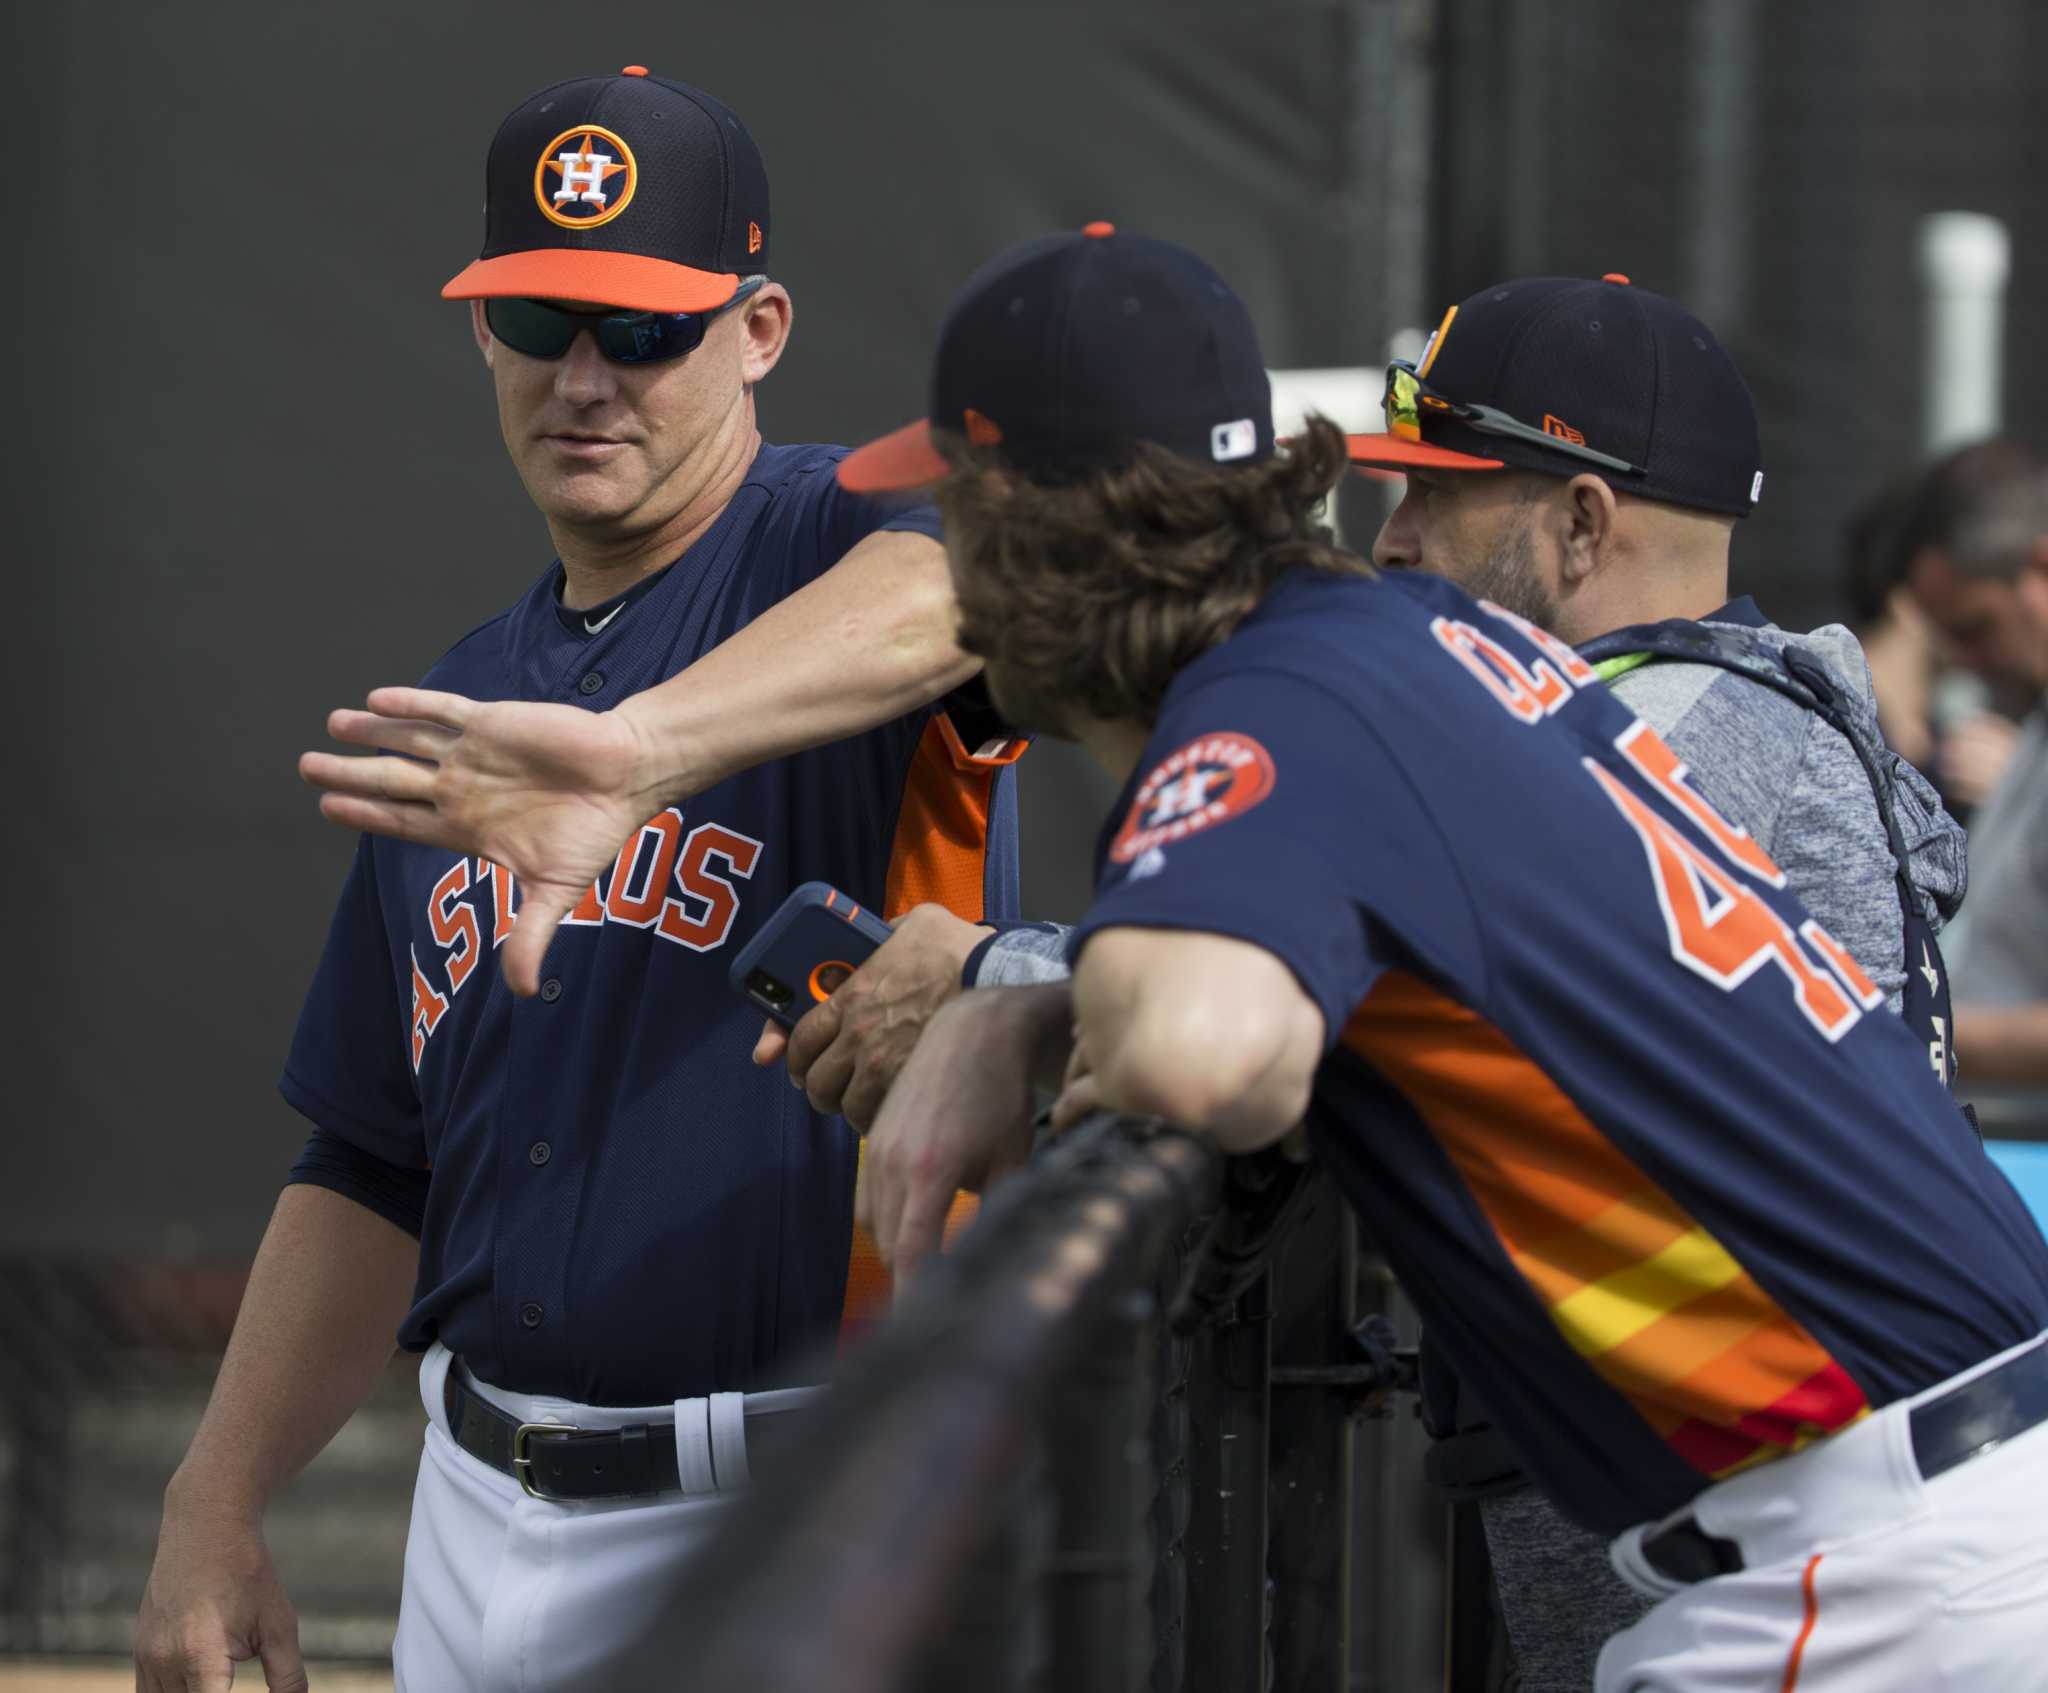 Opening-Day excitement never gets old for Astros manager A.J. Hinch